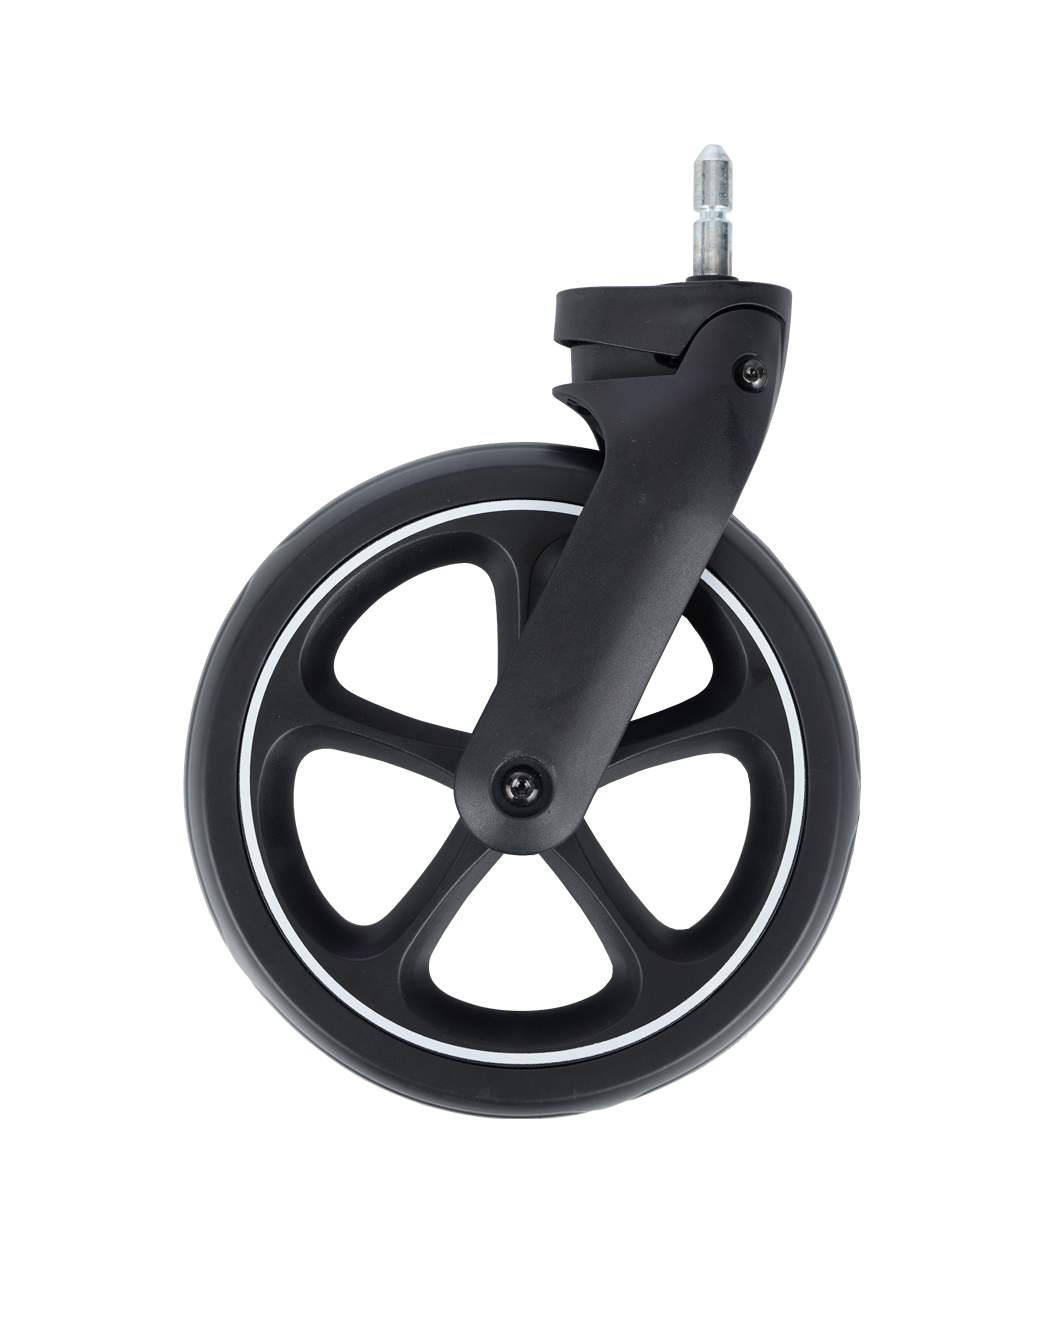 Front wheel and fork | Harvey⁵ and Harvey⁵ Premium